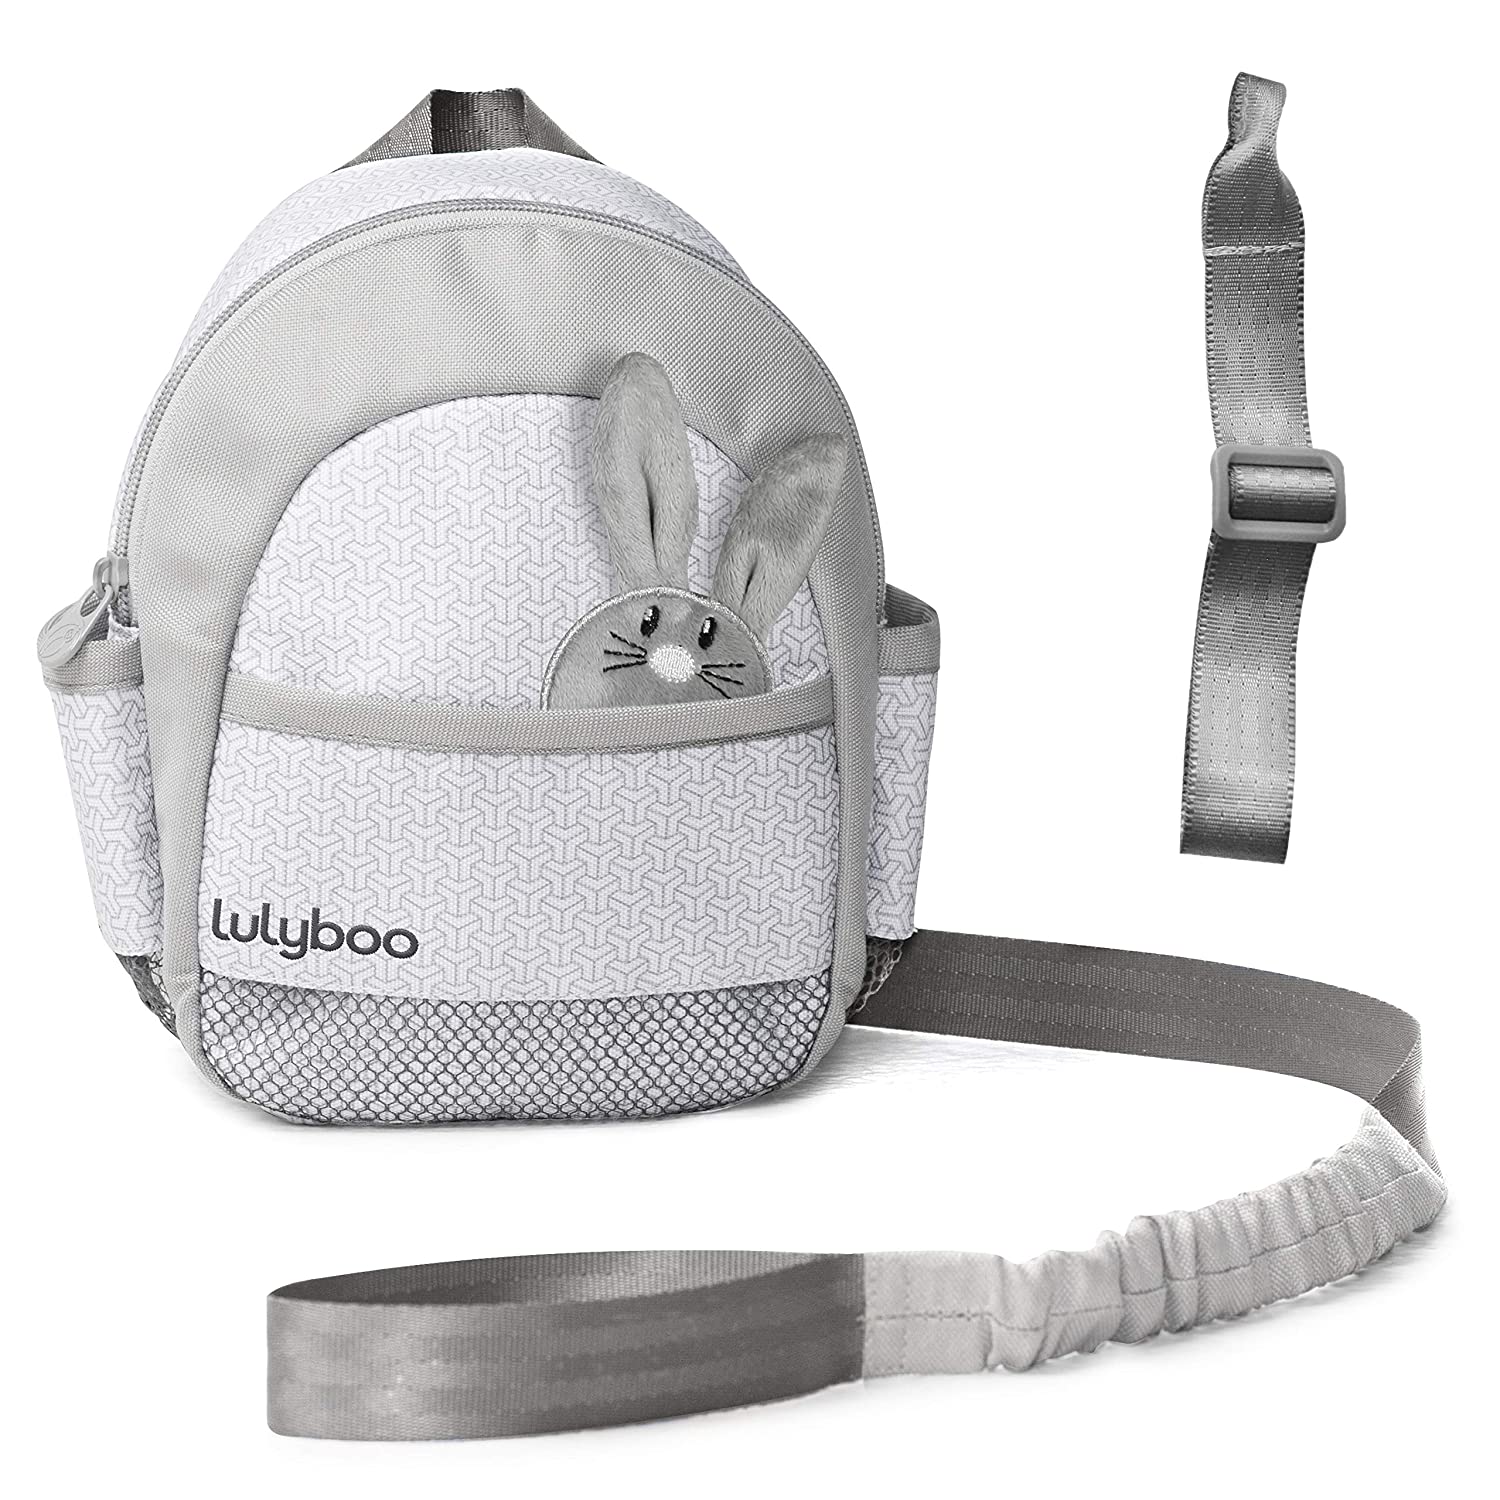 Lulyboo Toddler Safety Harness and Backpack